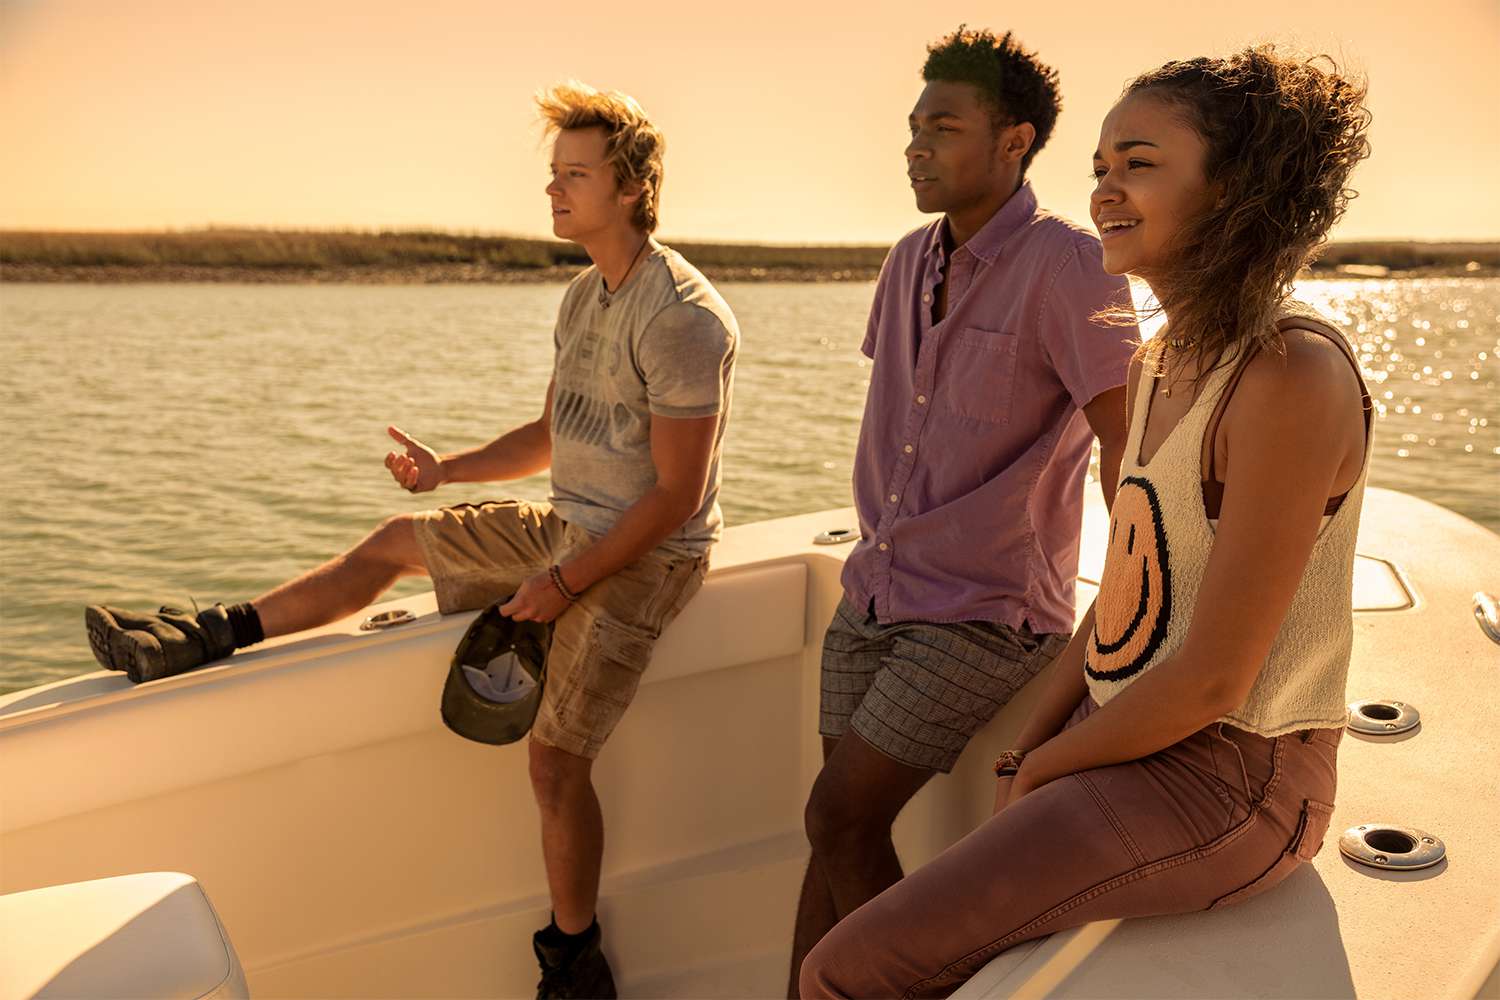 OUTER BANKS (L to R) RUDY PANKOW as JJ, JONATHAN DAVISS as POPE, and MADISON BAILEY as KIARA in episode 204 of OUTER BANKS Cr. JACKSON LEE DAVIS/NETFLIX © 2021